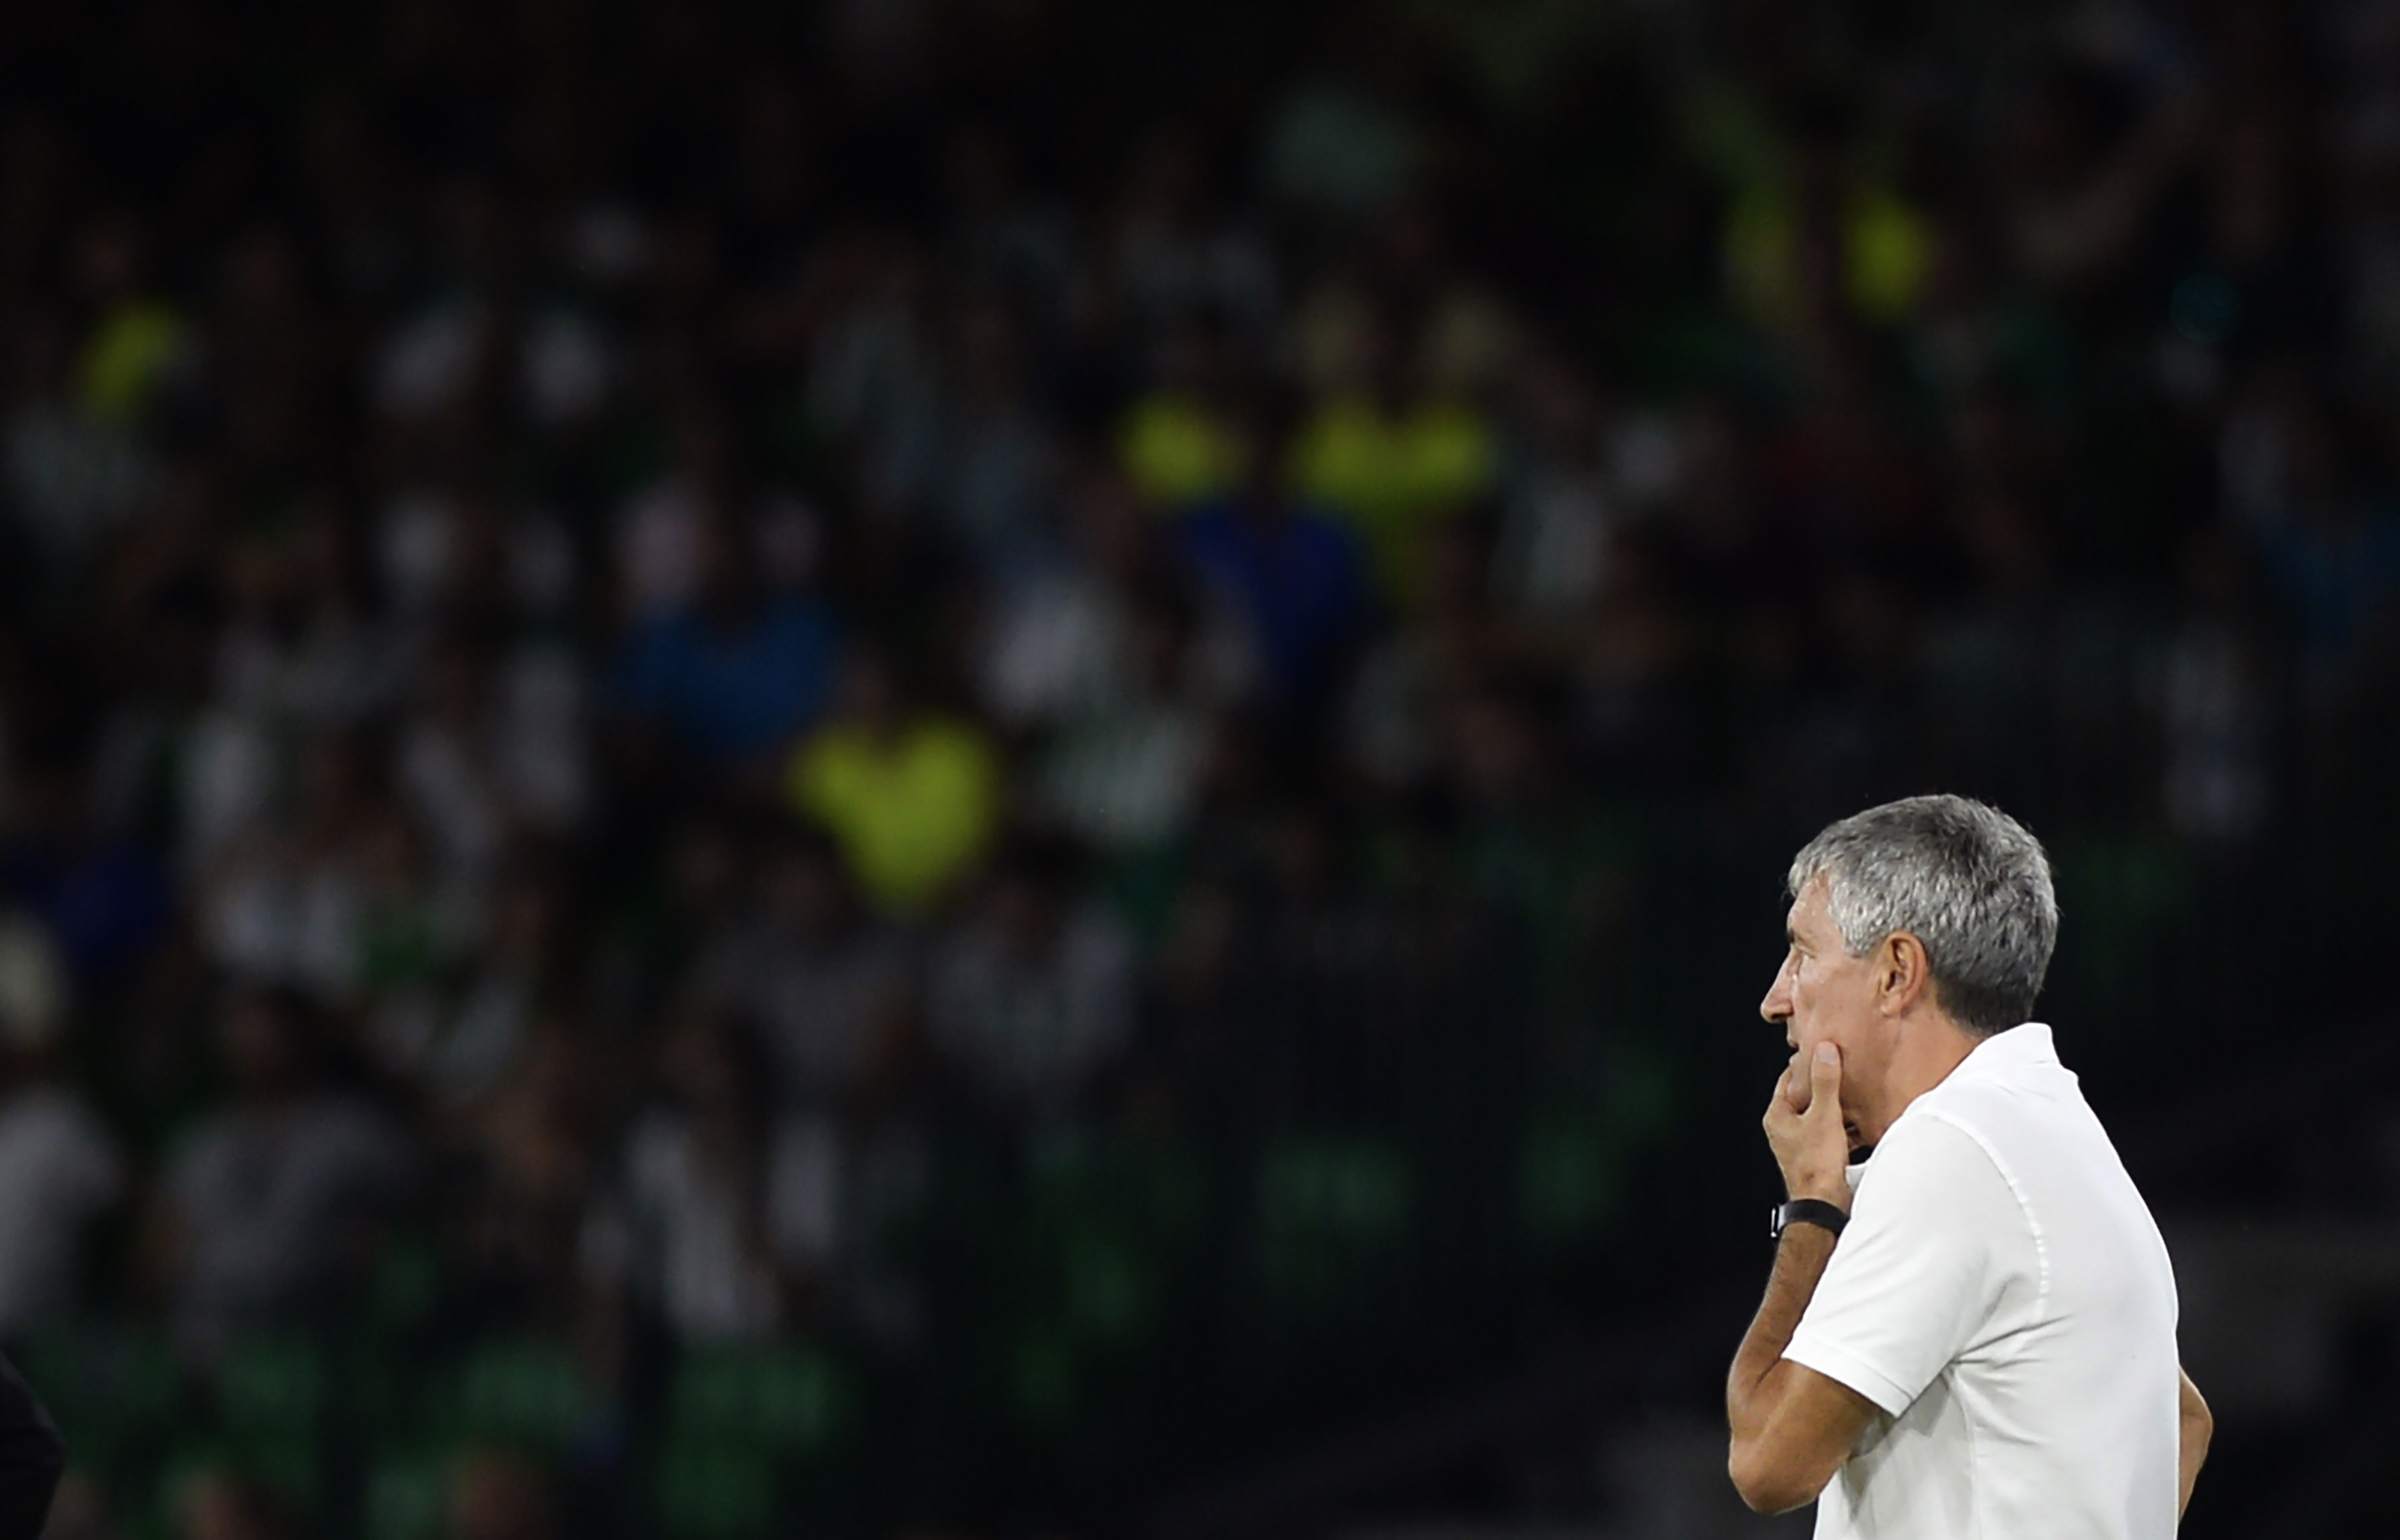 Real Betis' Spanish coach Quique Setien looks at the game from the sideline during the Spanish league football match between Real Betis and Athletic Club Bilbao at the Benito Villamarin stadium in Seville on September 23, 2018. (Photo by CRISTINA QUICLER / AFP)        (Photo credit should read CRISTINA QUICLER/AFP/Getty Images)